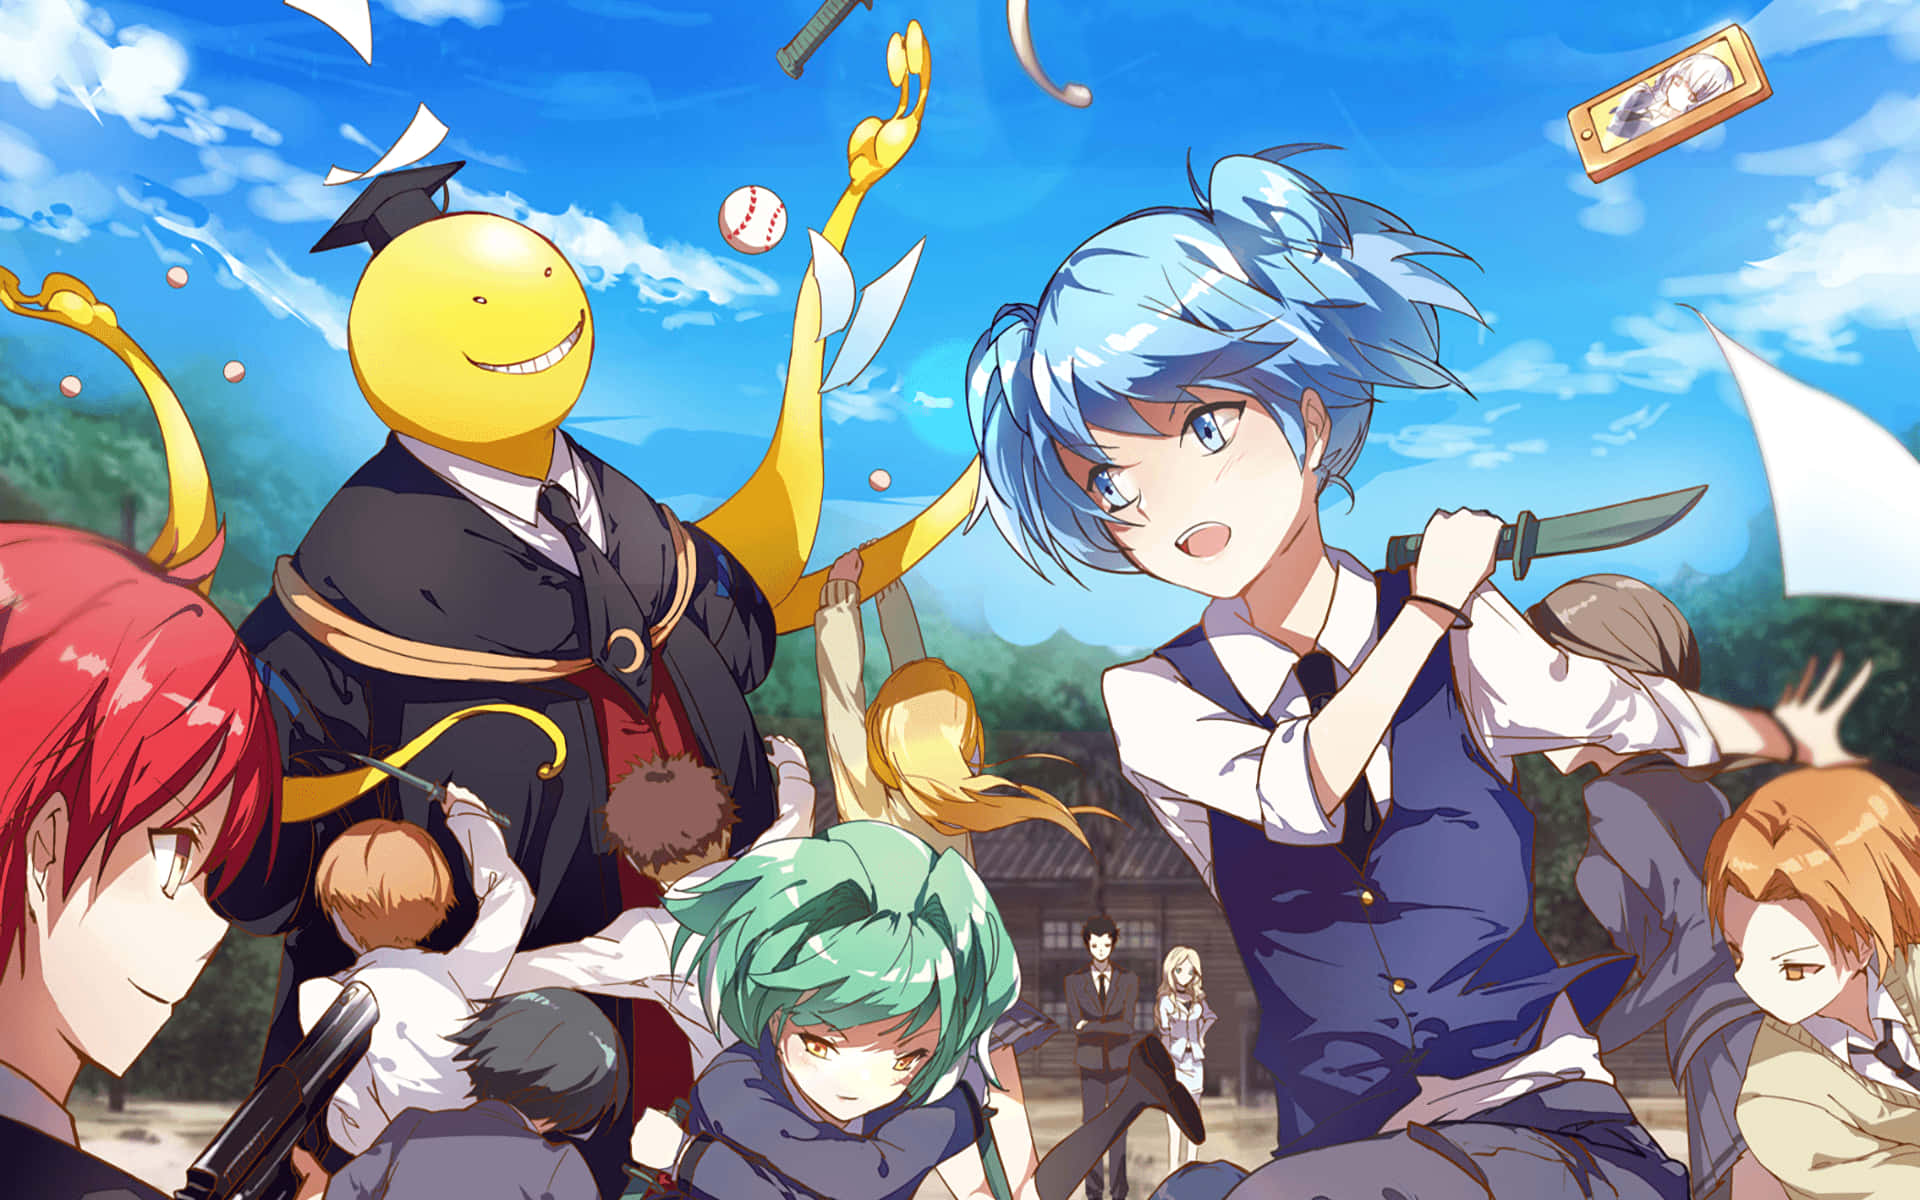 "Unlock the power of your potential with the epic anime Assassination Classroom"